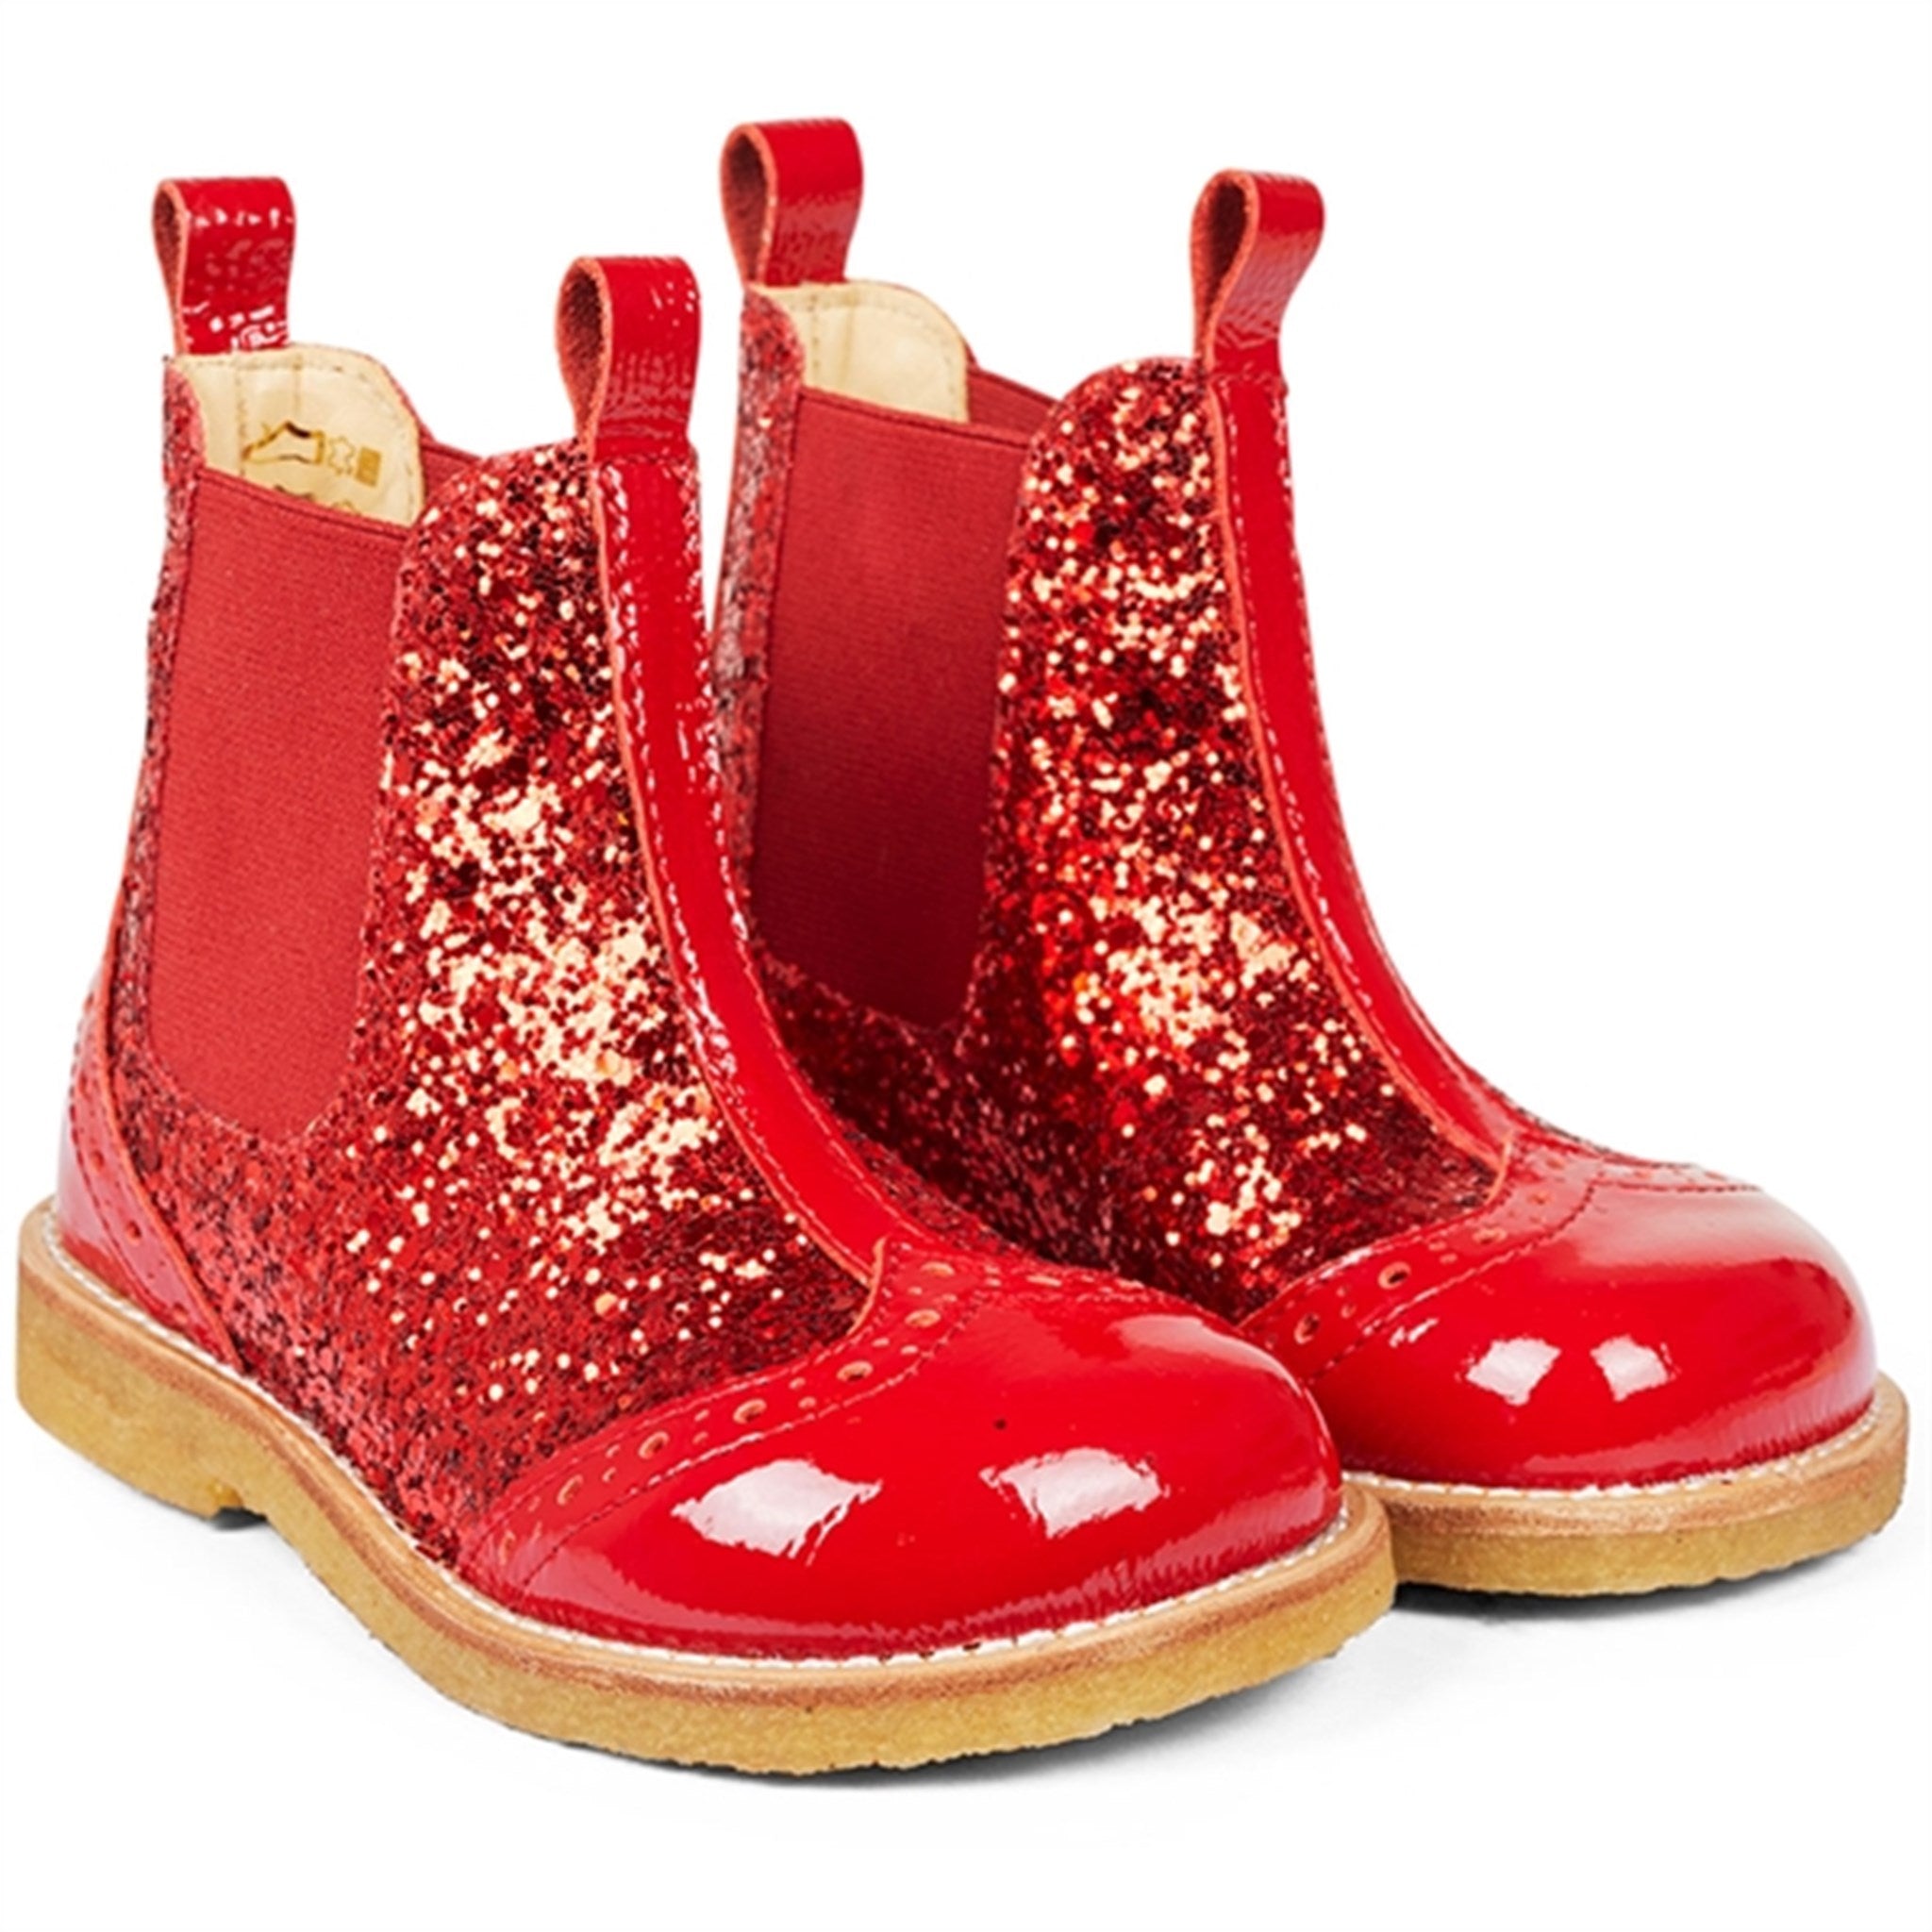 Angulus Chelsea Boots With Glitter Red/Red/Red Elastic